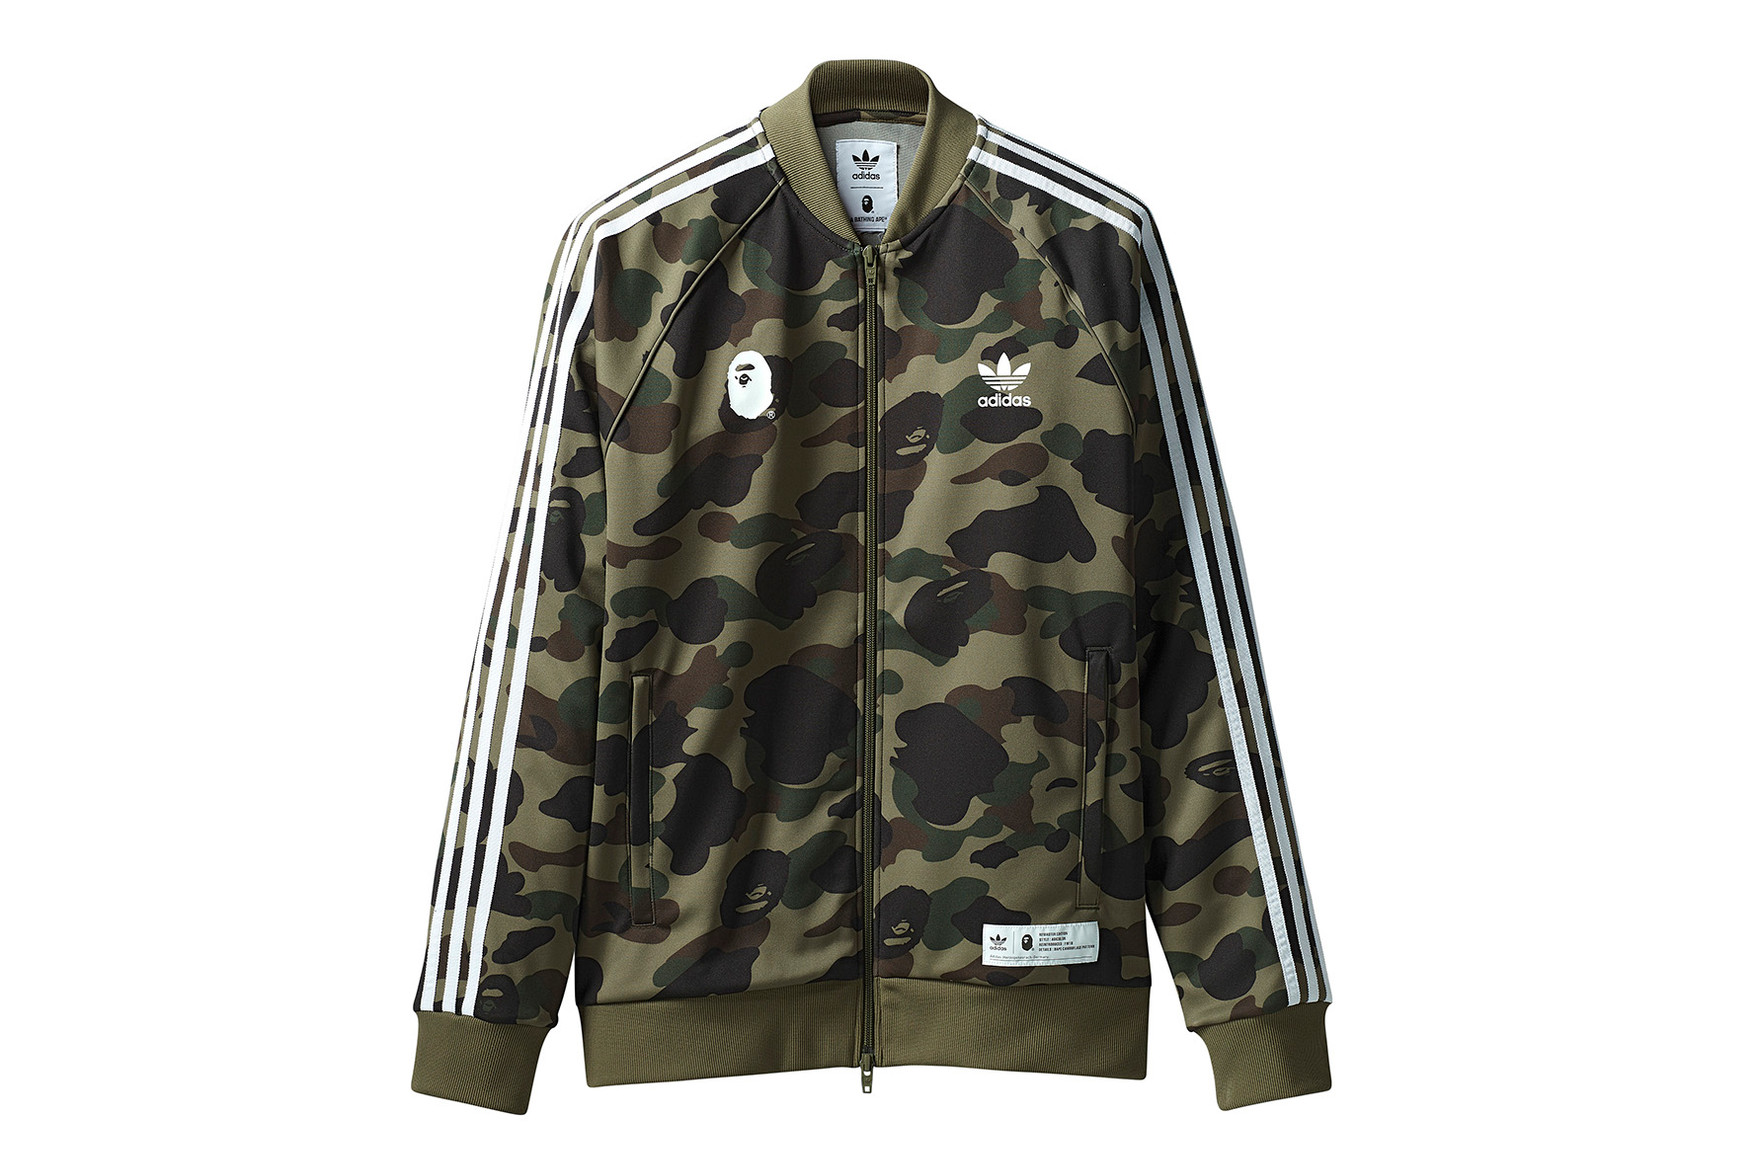 BAPE and adidas Originals Return with an All-New Camo Collection